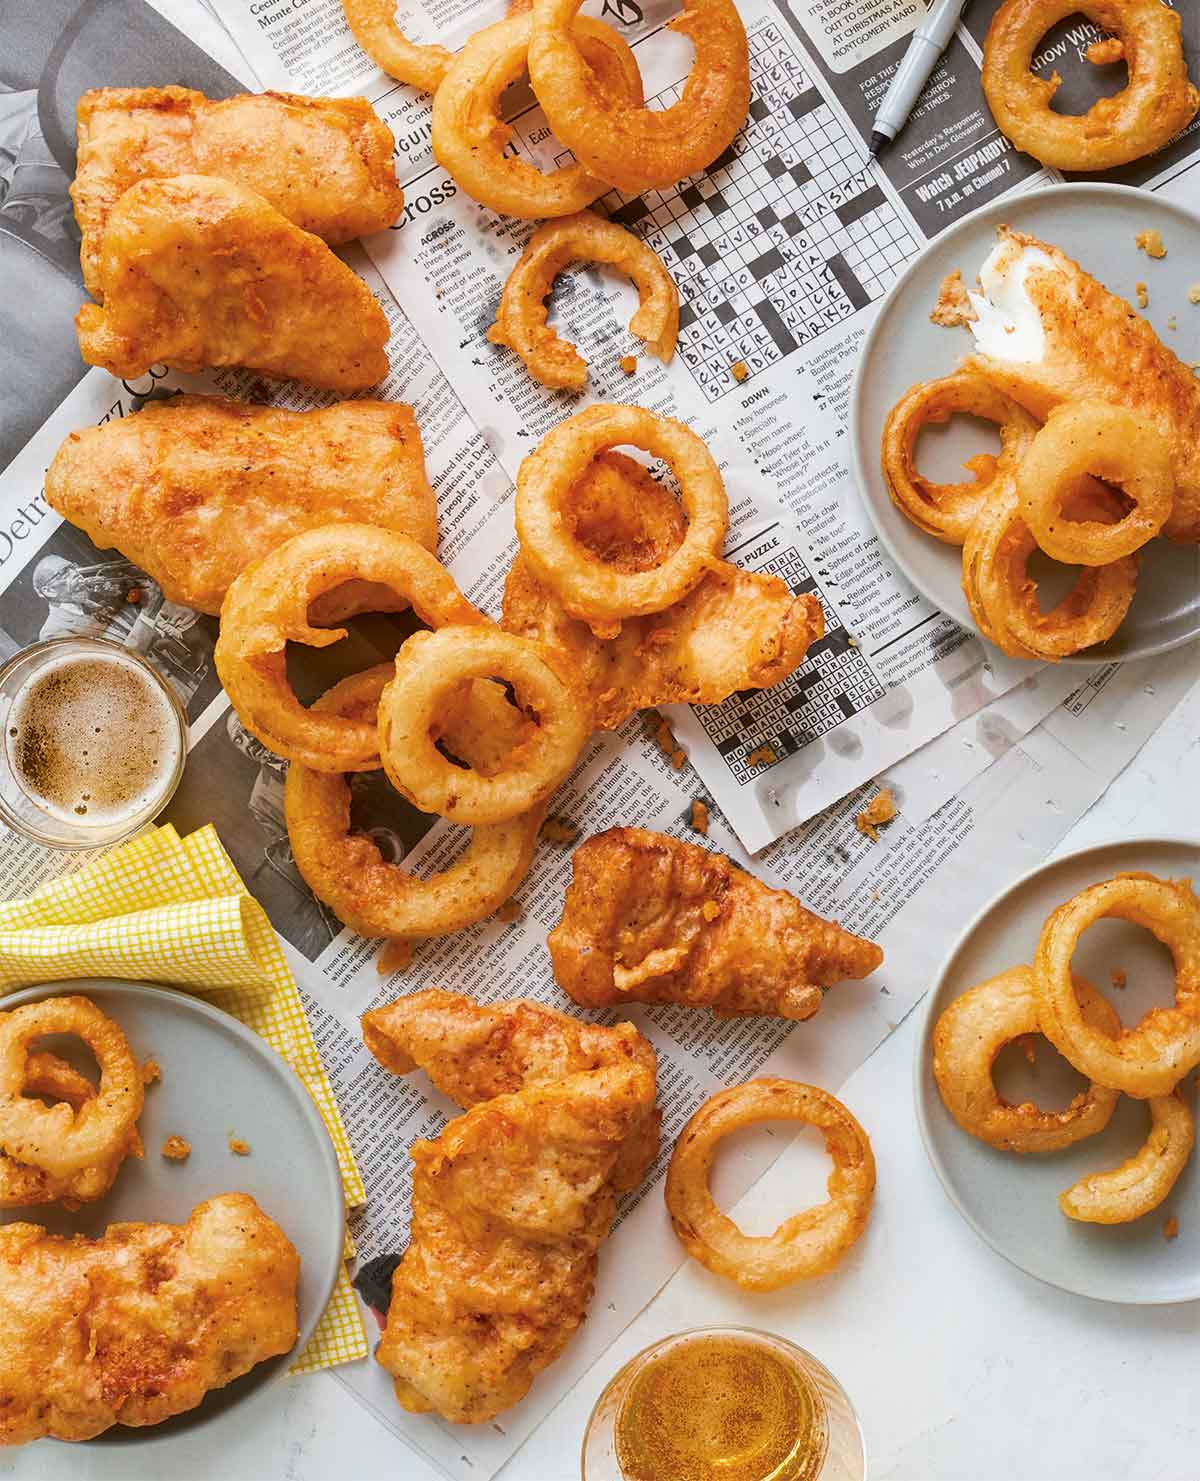 Several pieces of beer-battered fish scattered across newspaper with fried onions rings and two glasses of beer.